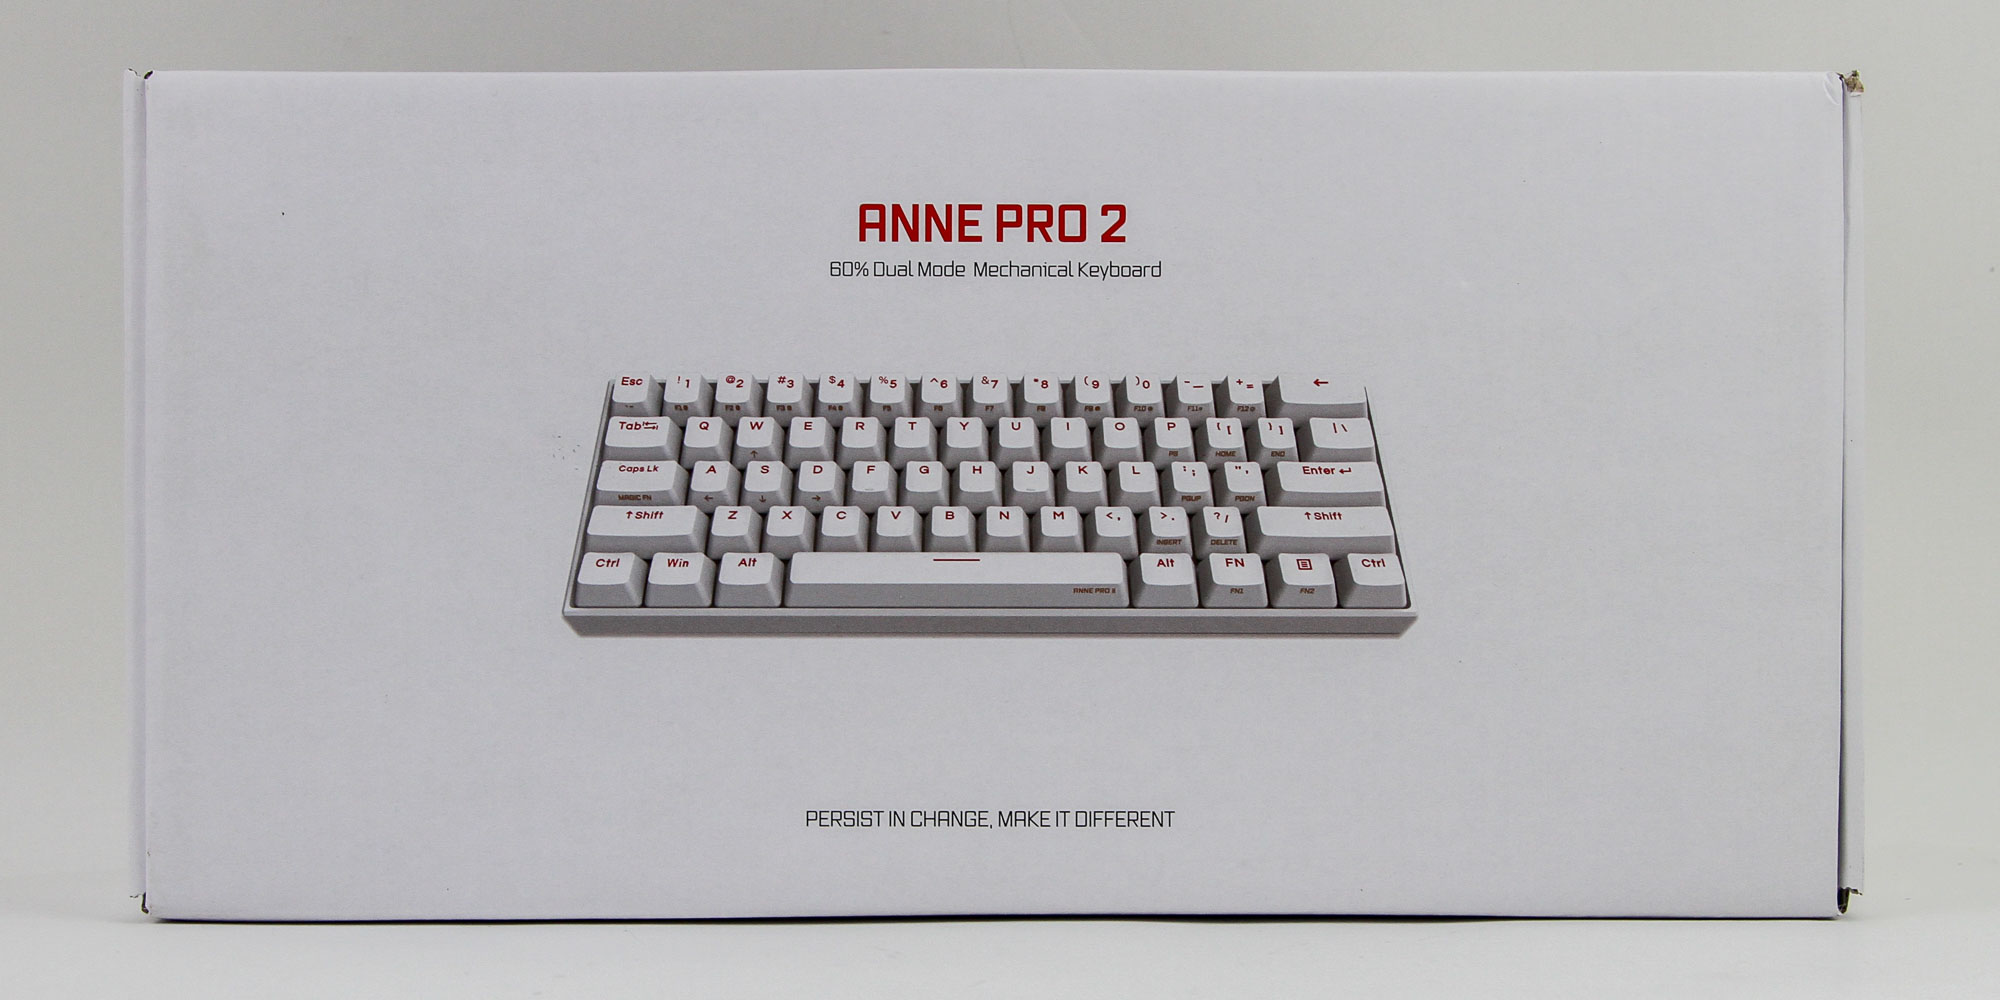 Anne Pro 2 Keyboard Review - Tapping is Key - Closer Examination